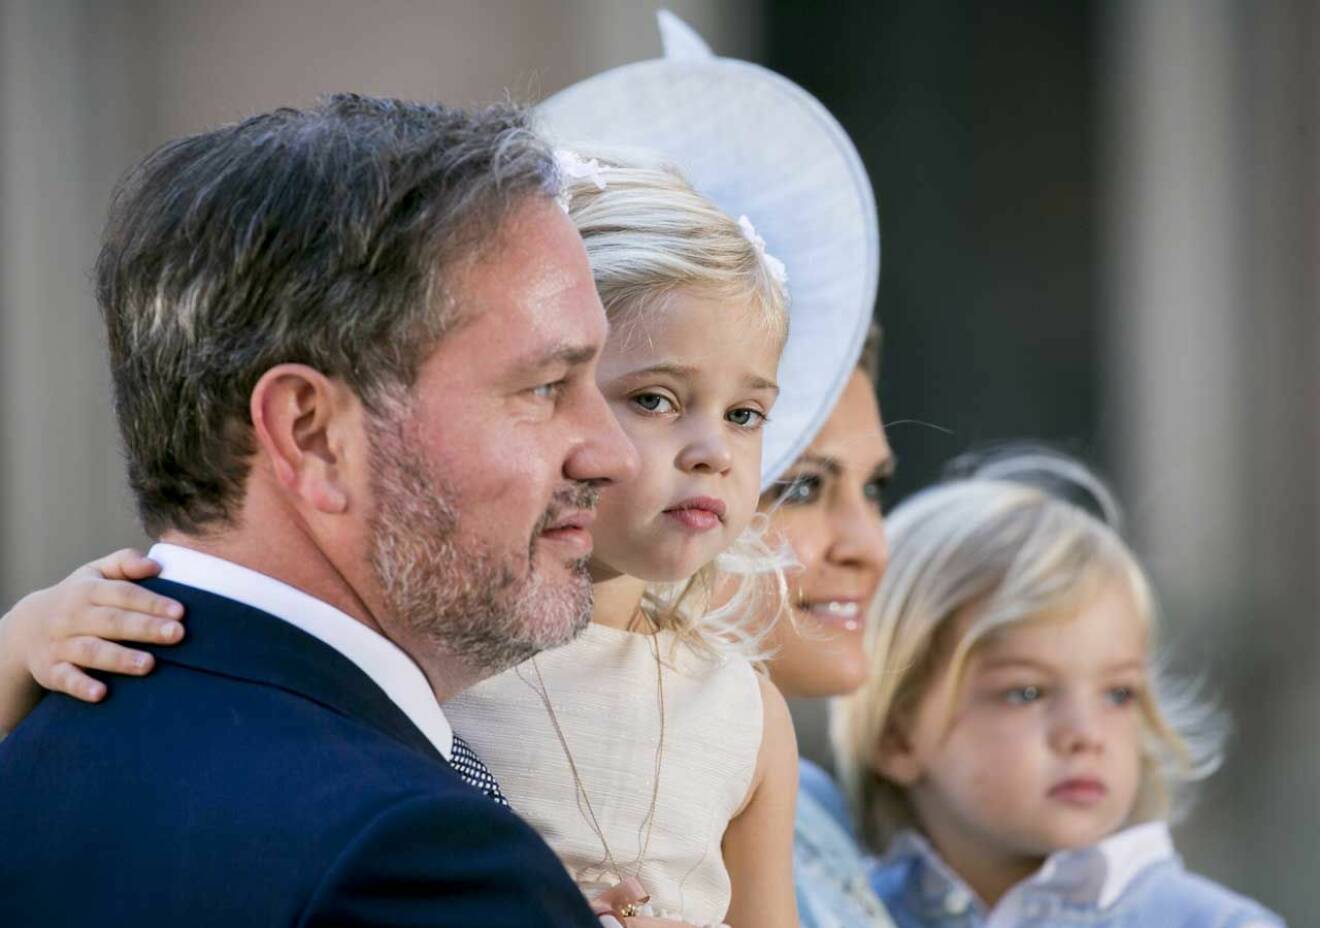 Chris O'Neill med prinsessan Leonore.